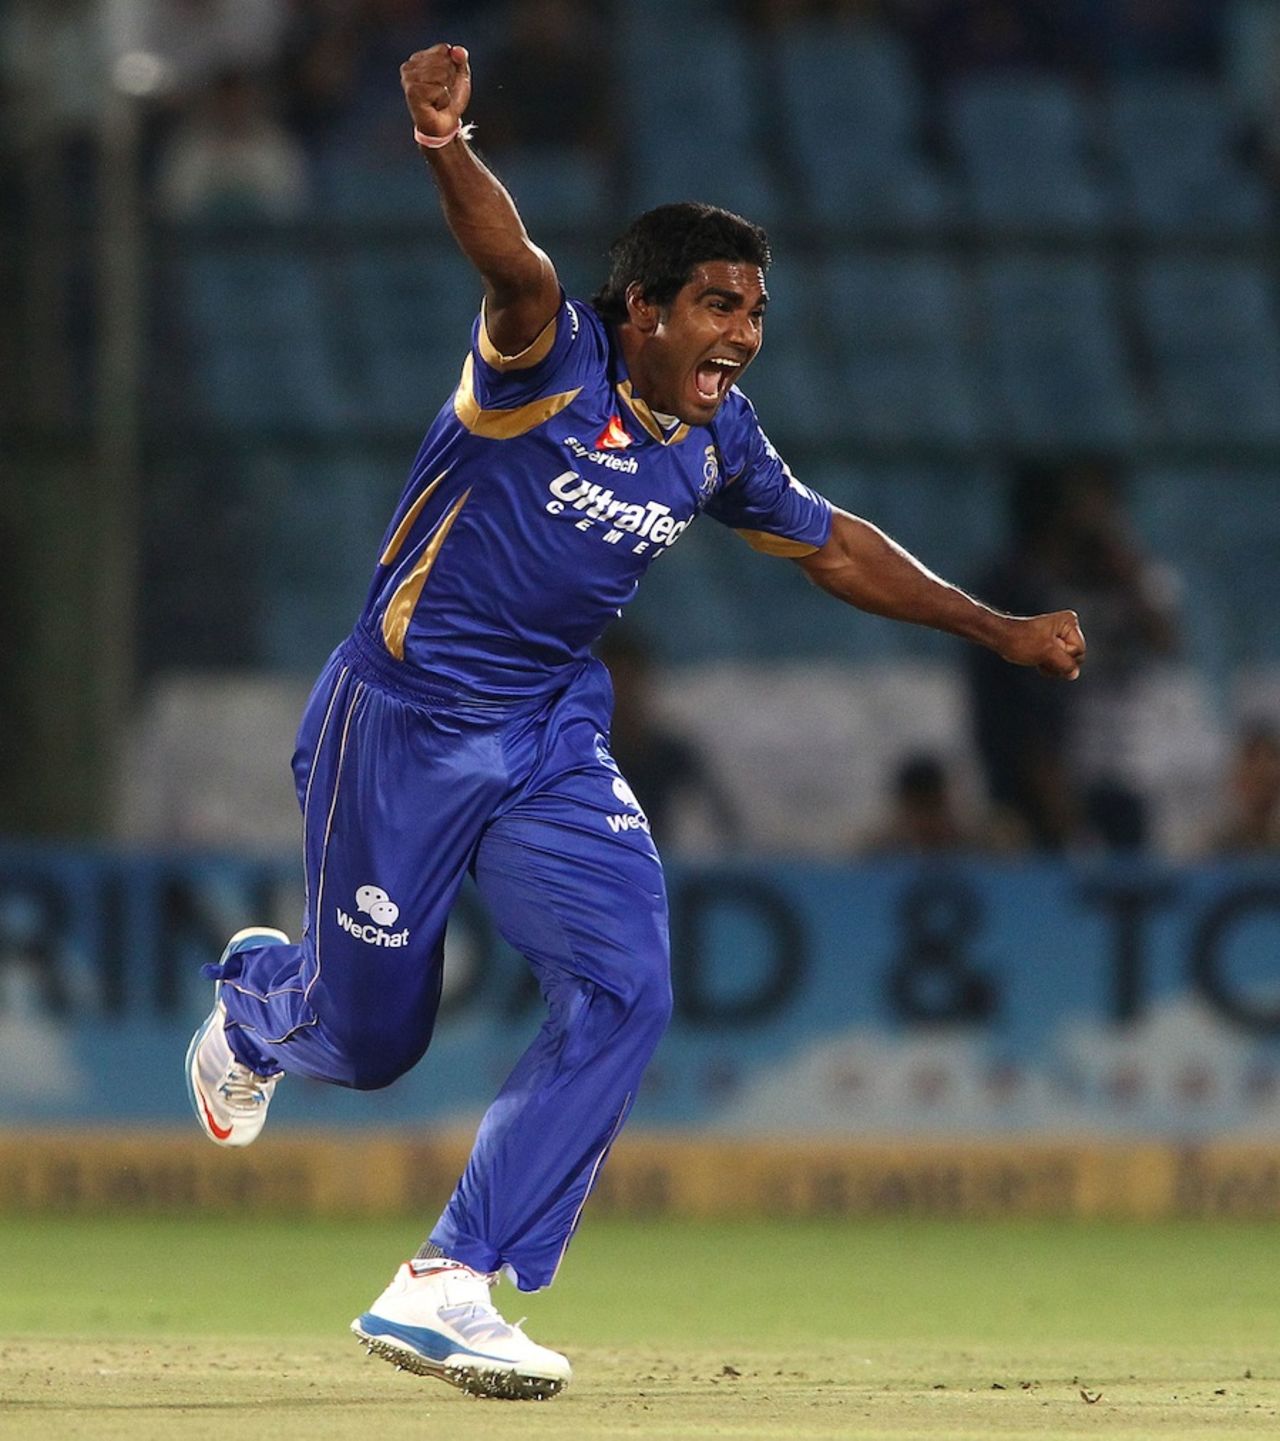 Rahul Shukla took three wickets in an over, Rajasthan Royals v Otago, Champions League 2013, Jaipur, October 1, 2013